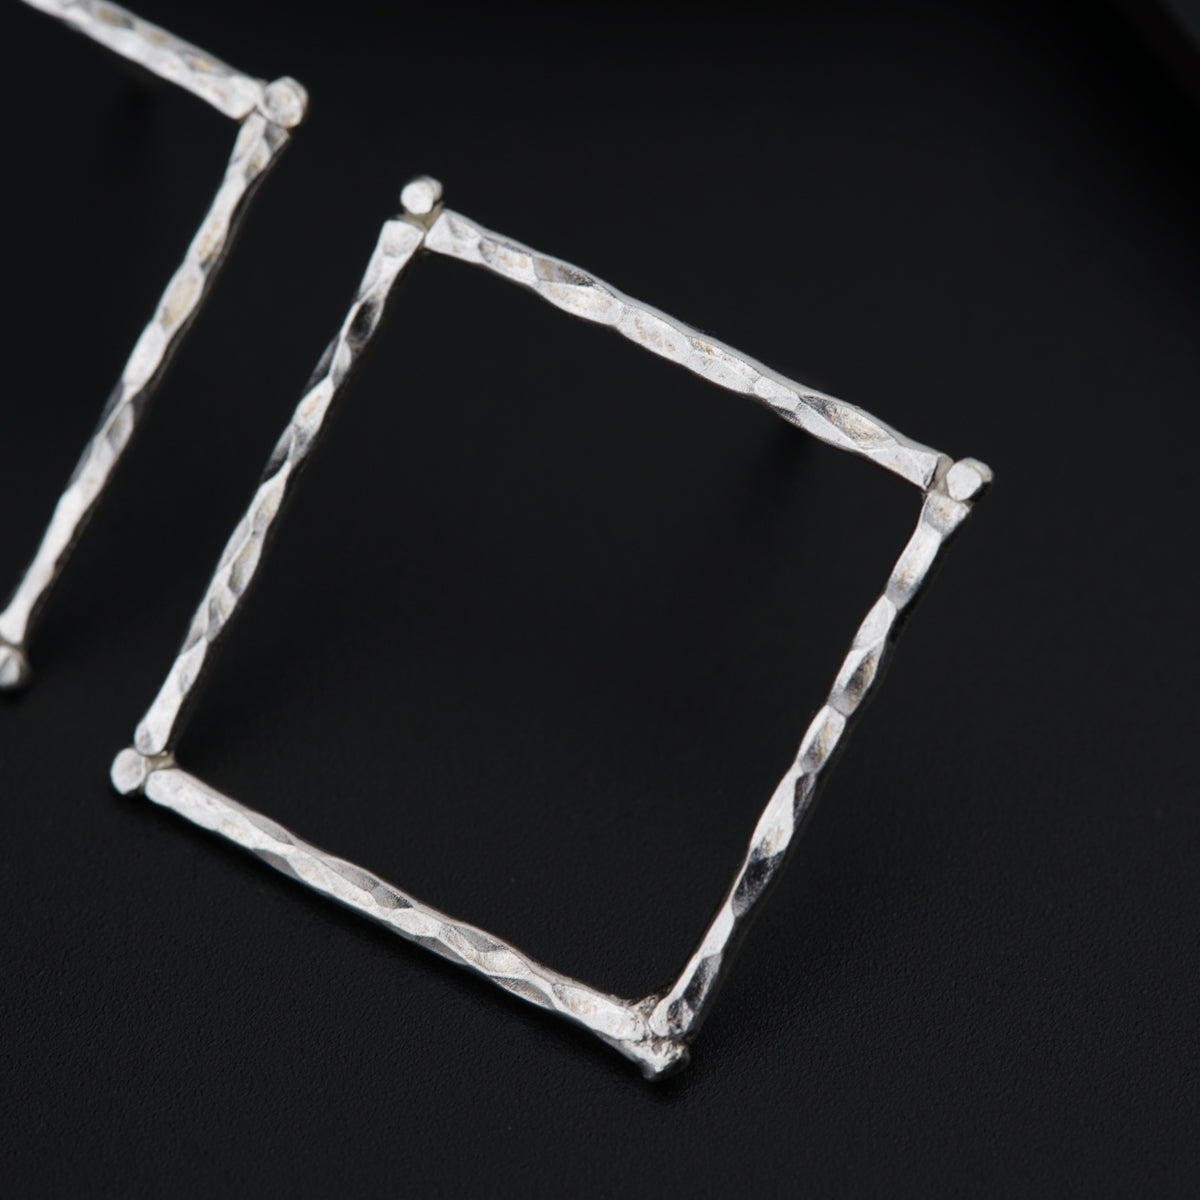 a pair of silver square earrings on a black surface